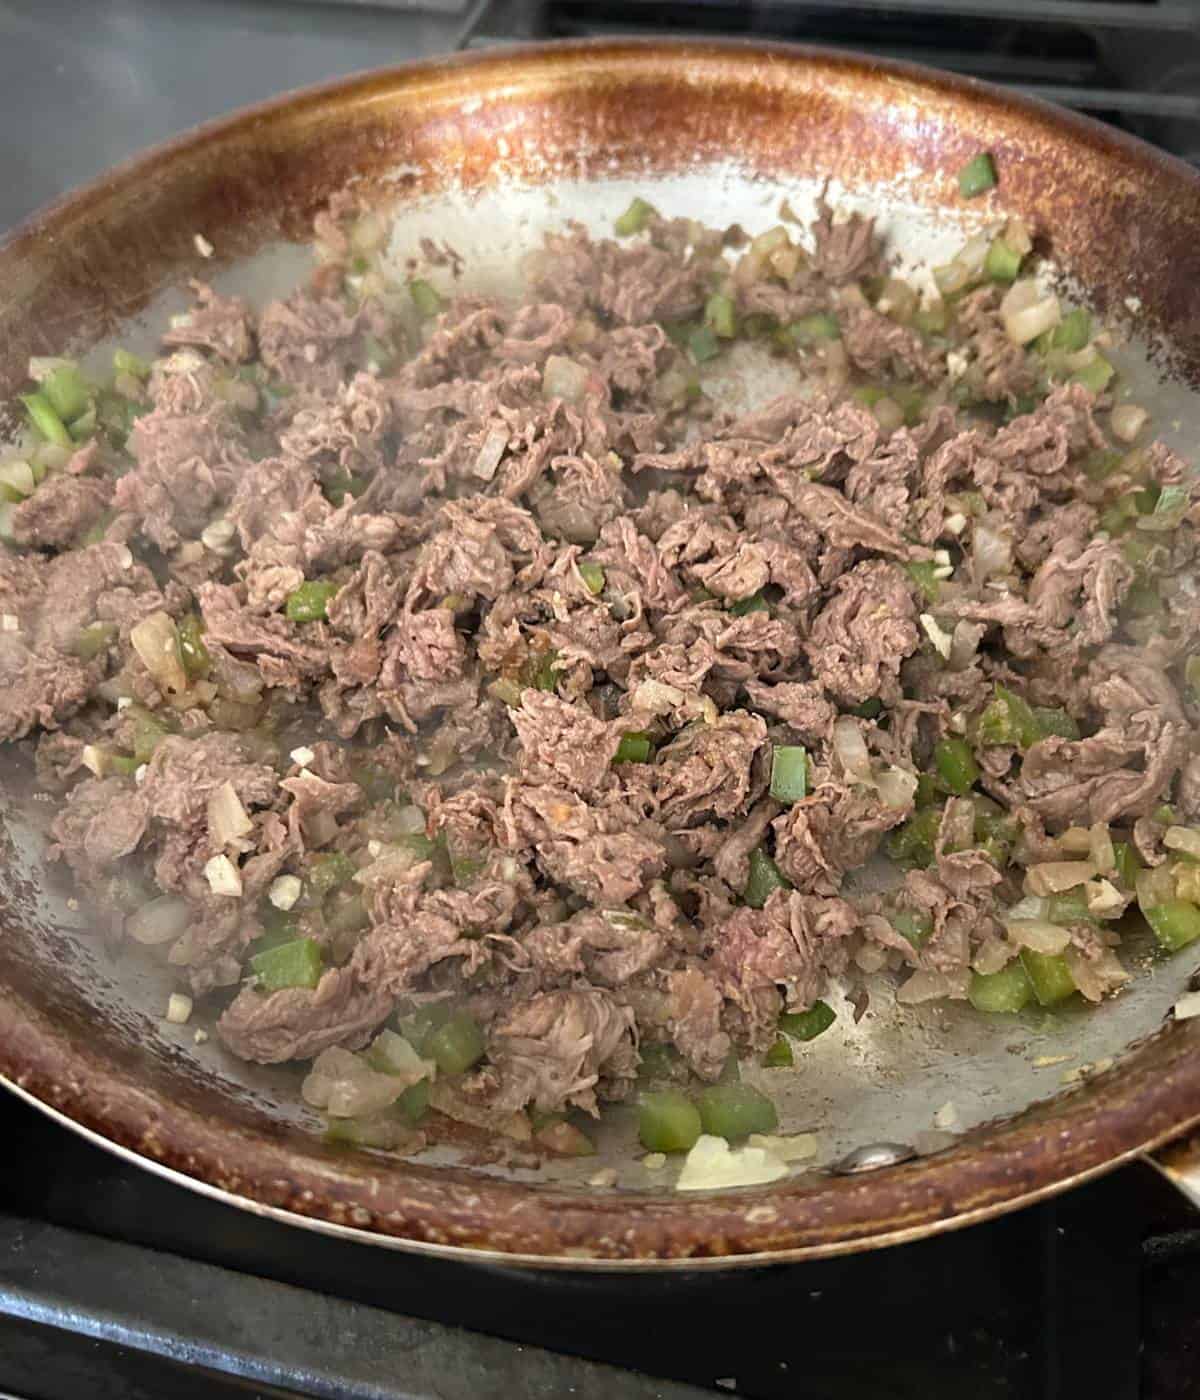 Philly cheesesteak filling in skillet.